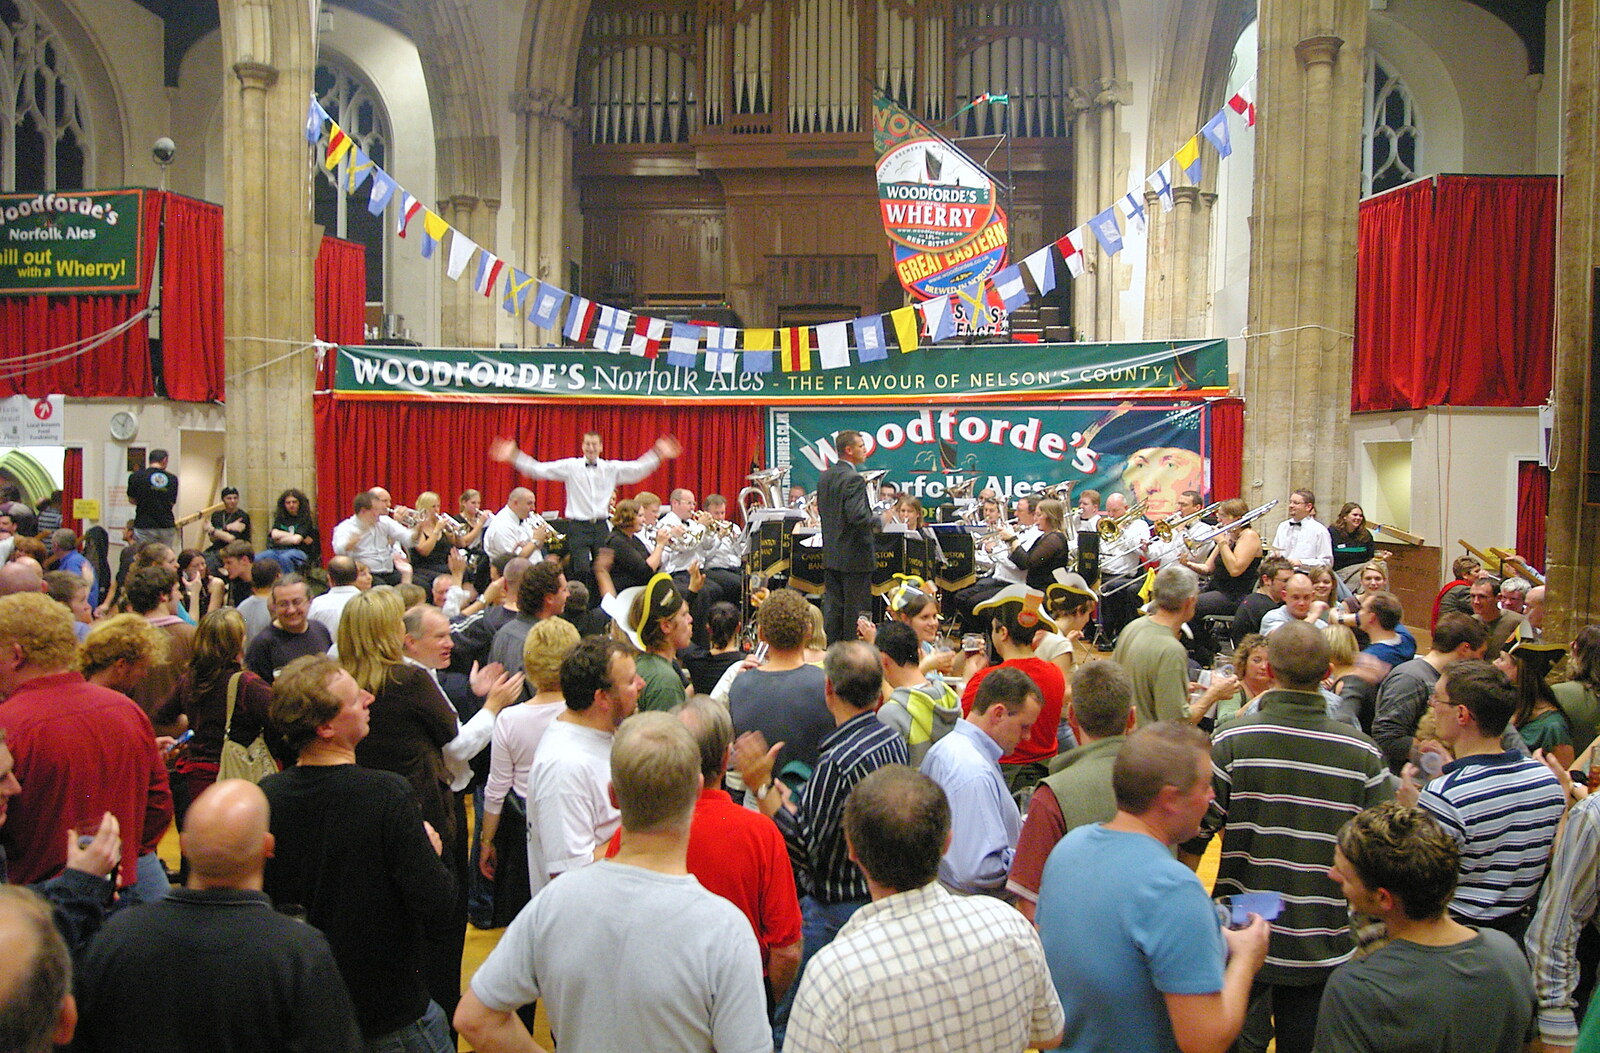 The 28th Norwich Beer Festival, St. Andrew's Hall, Norwich - 26th October 2005: The Cawston's conductor does Jazz Hands